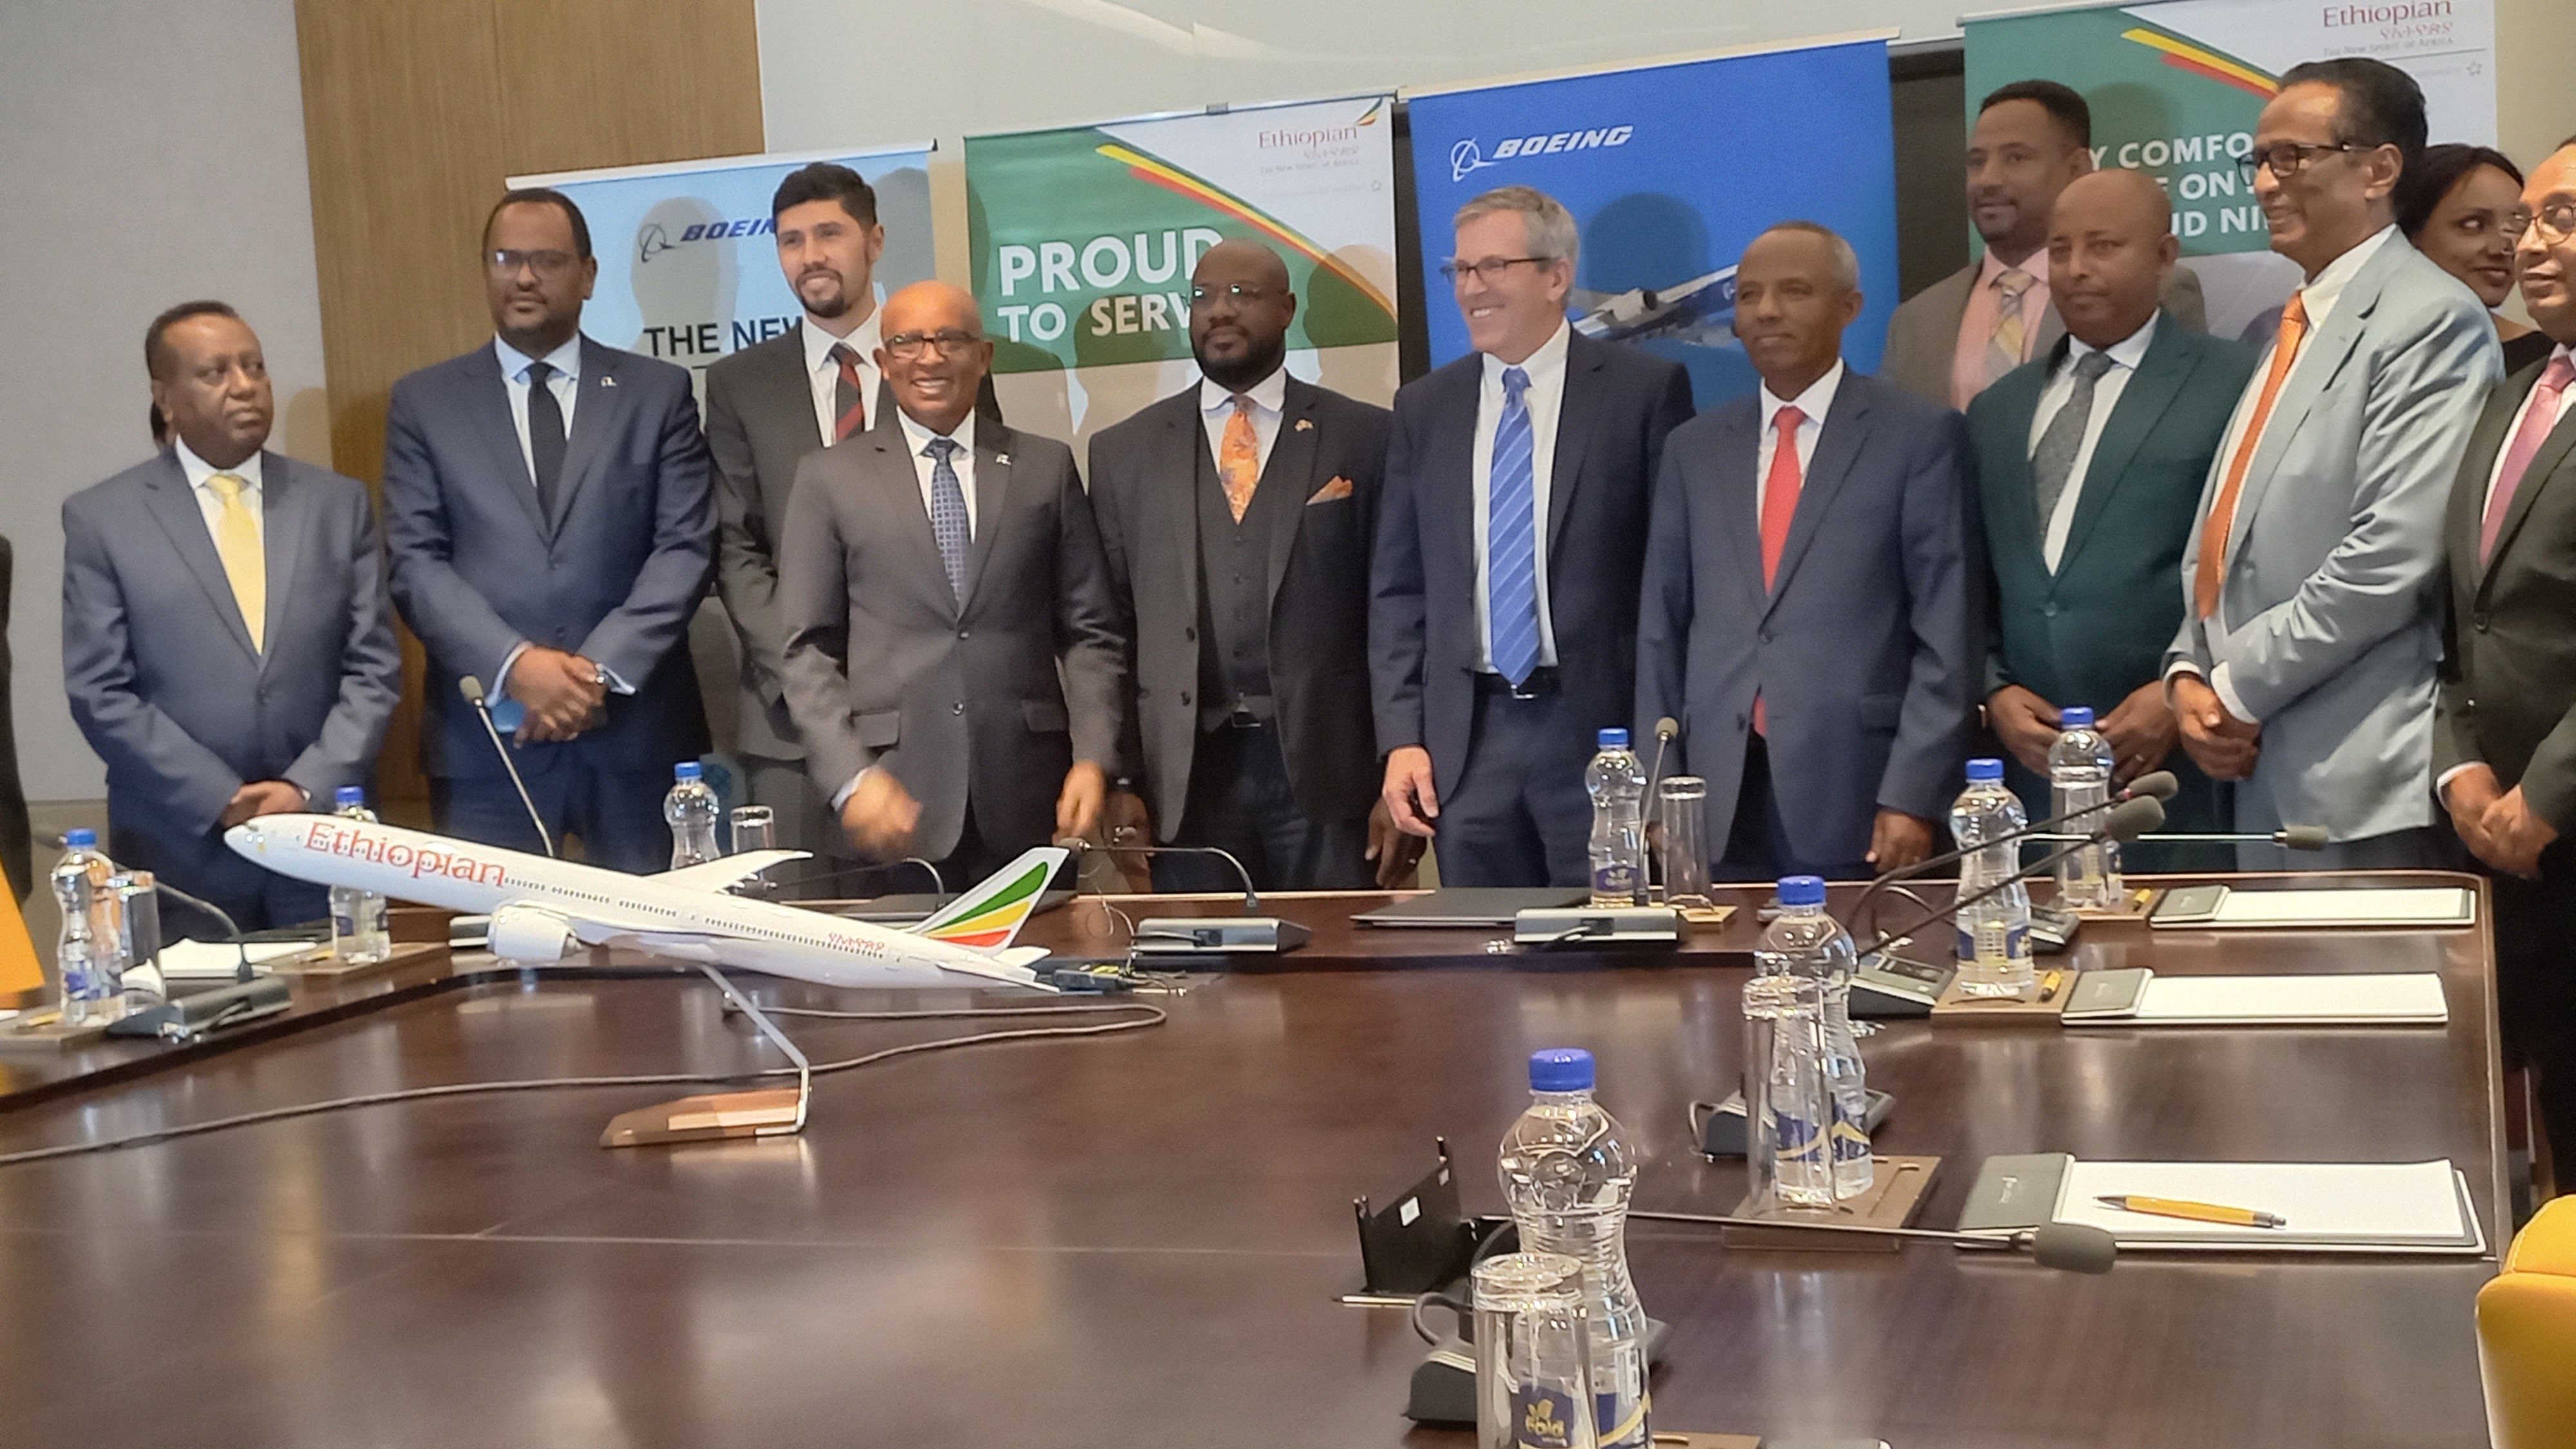 The Ethiopian Airlines Group and Boeing have signed a Memorandum of Understanding (MOU) for the delivery of Africa's first Boeing B777X-9.